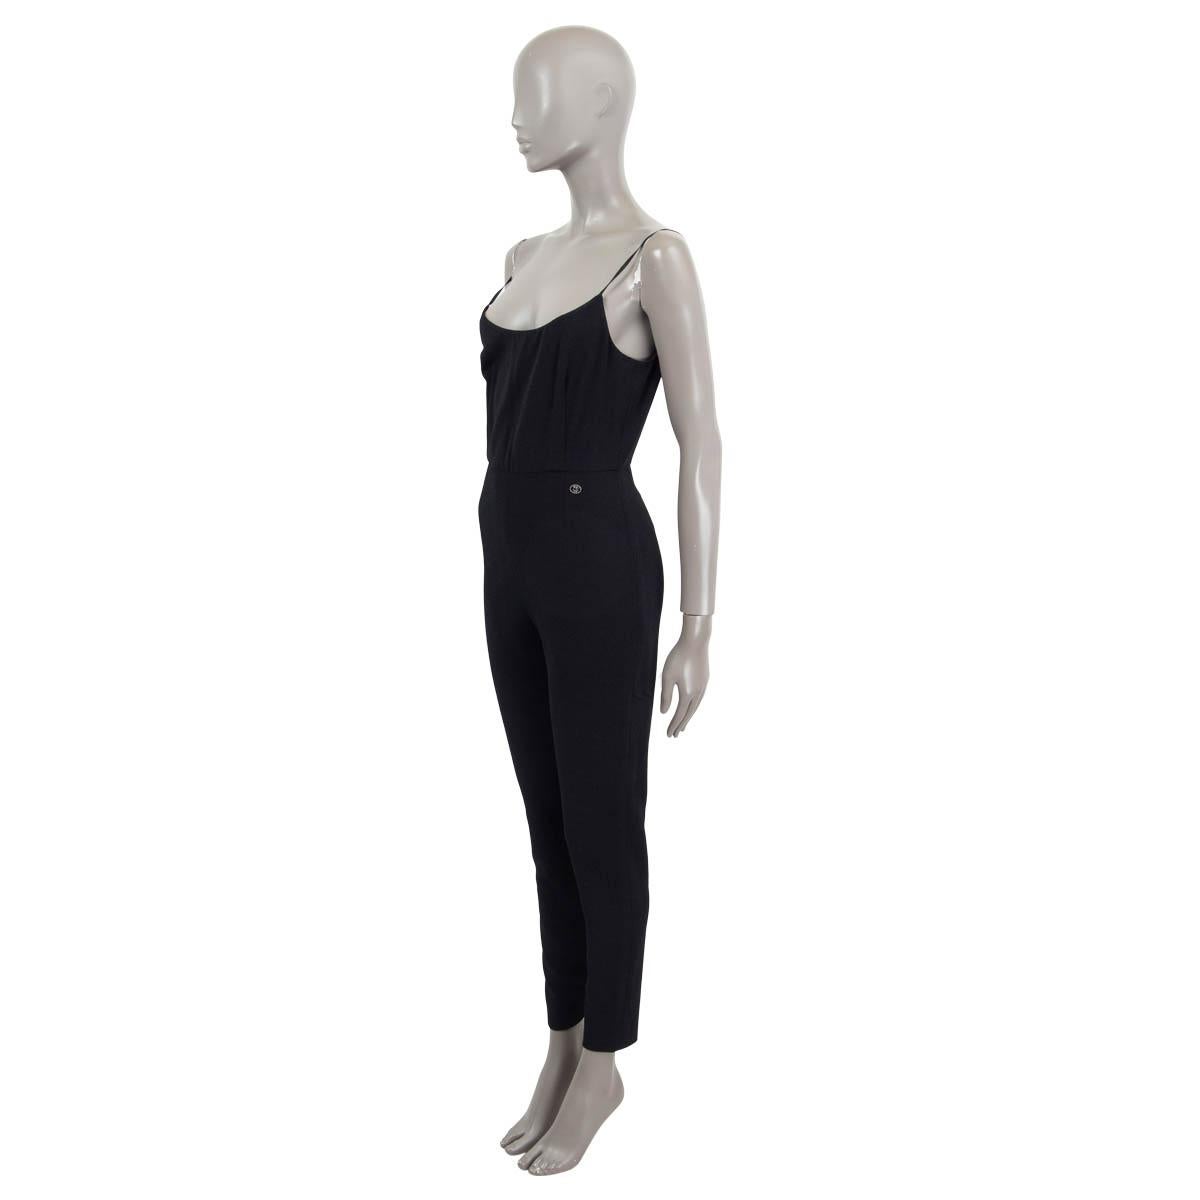 100% authentic Chanel 2019 sleeveless jumpsuit in black viscose (95%) and elastane (5%) with a black silk (91%) and elastane (9%) lining and spaghetti straps. Opens with a zipper at the back. Has been worn and is in excellent condition.